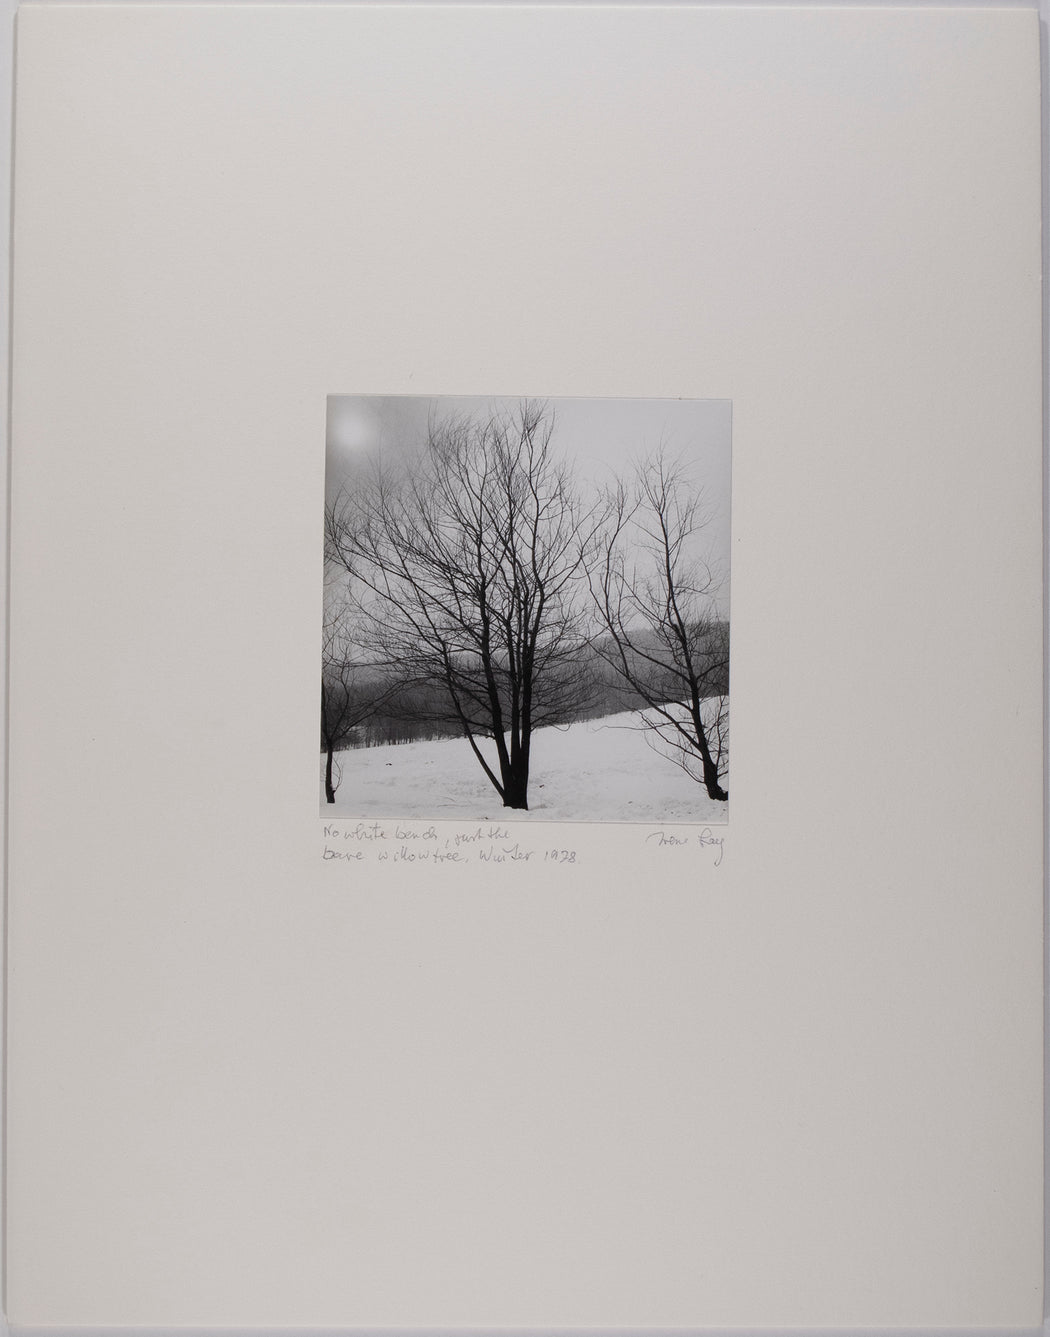 No White Bench, Just The Bare Willow Tree, Winter 1978